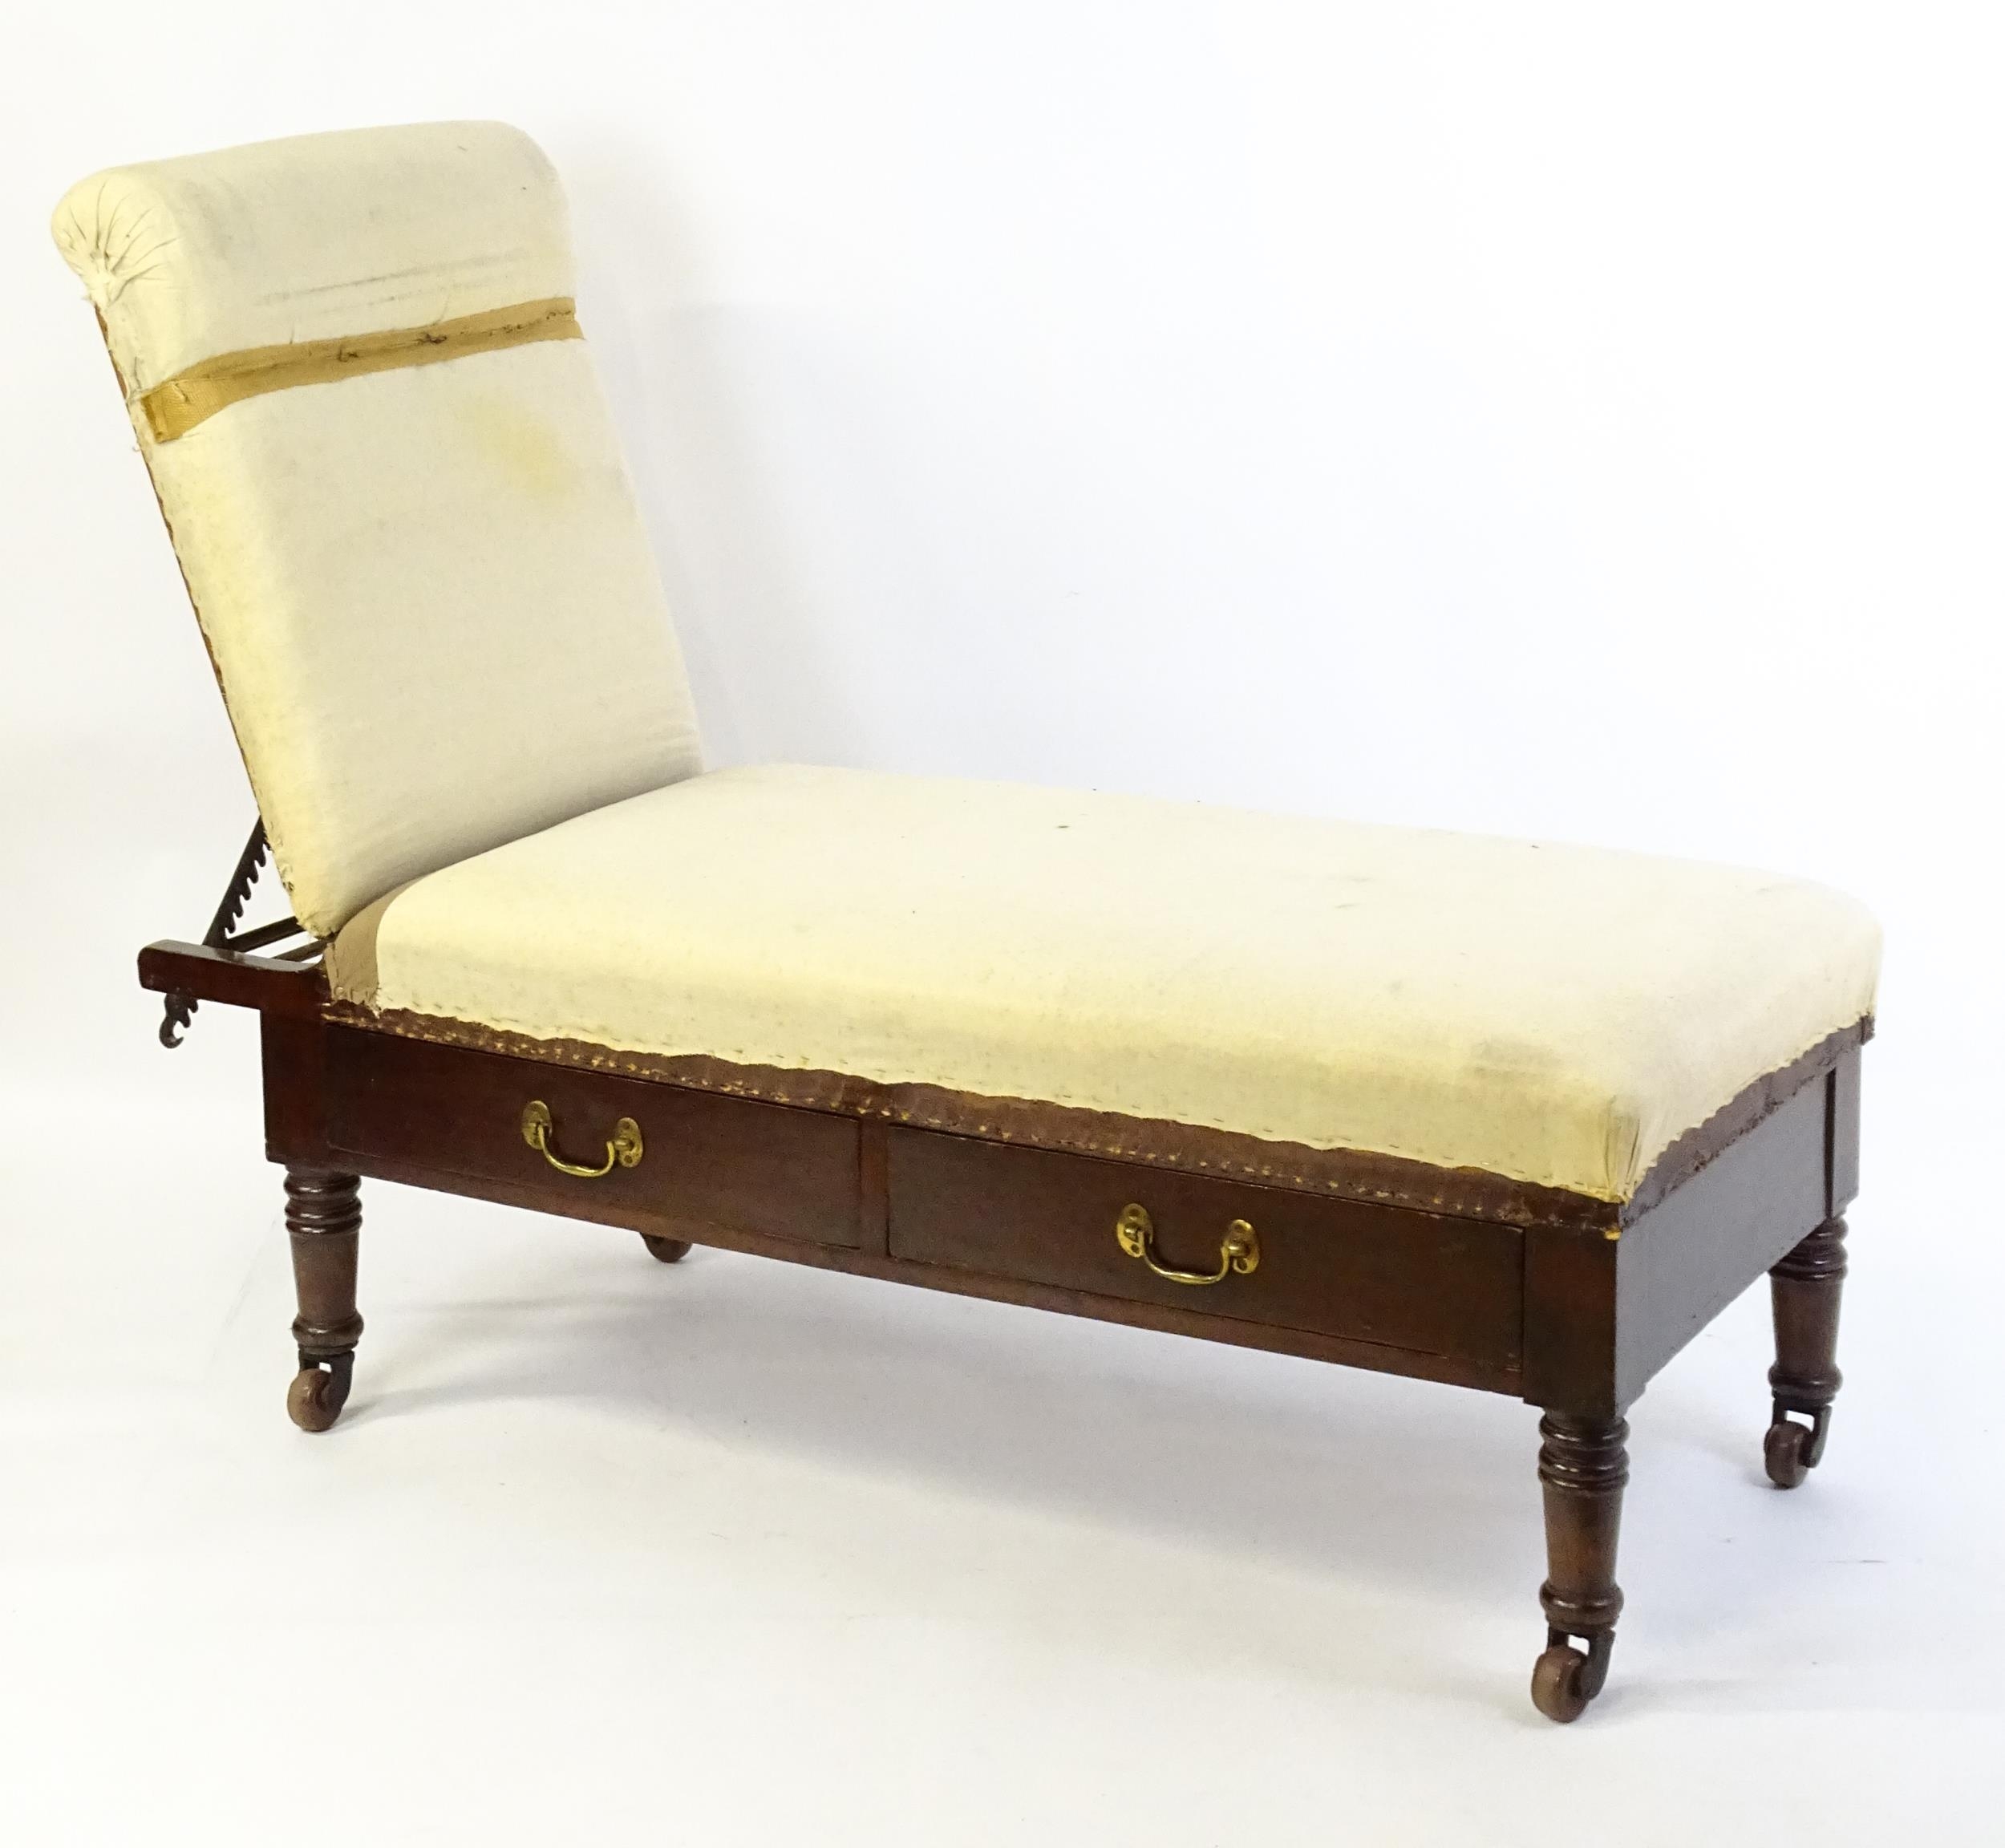 A Victorian 'Carters Literary Machine' day bed with an adjustable backrest above two short drawers